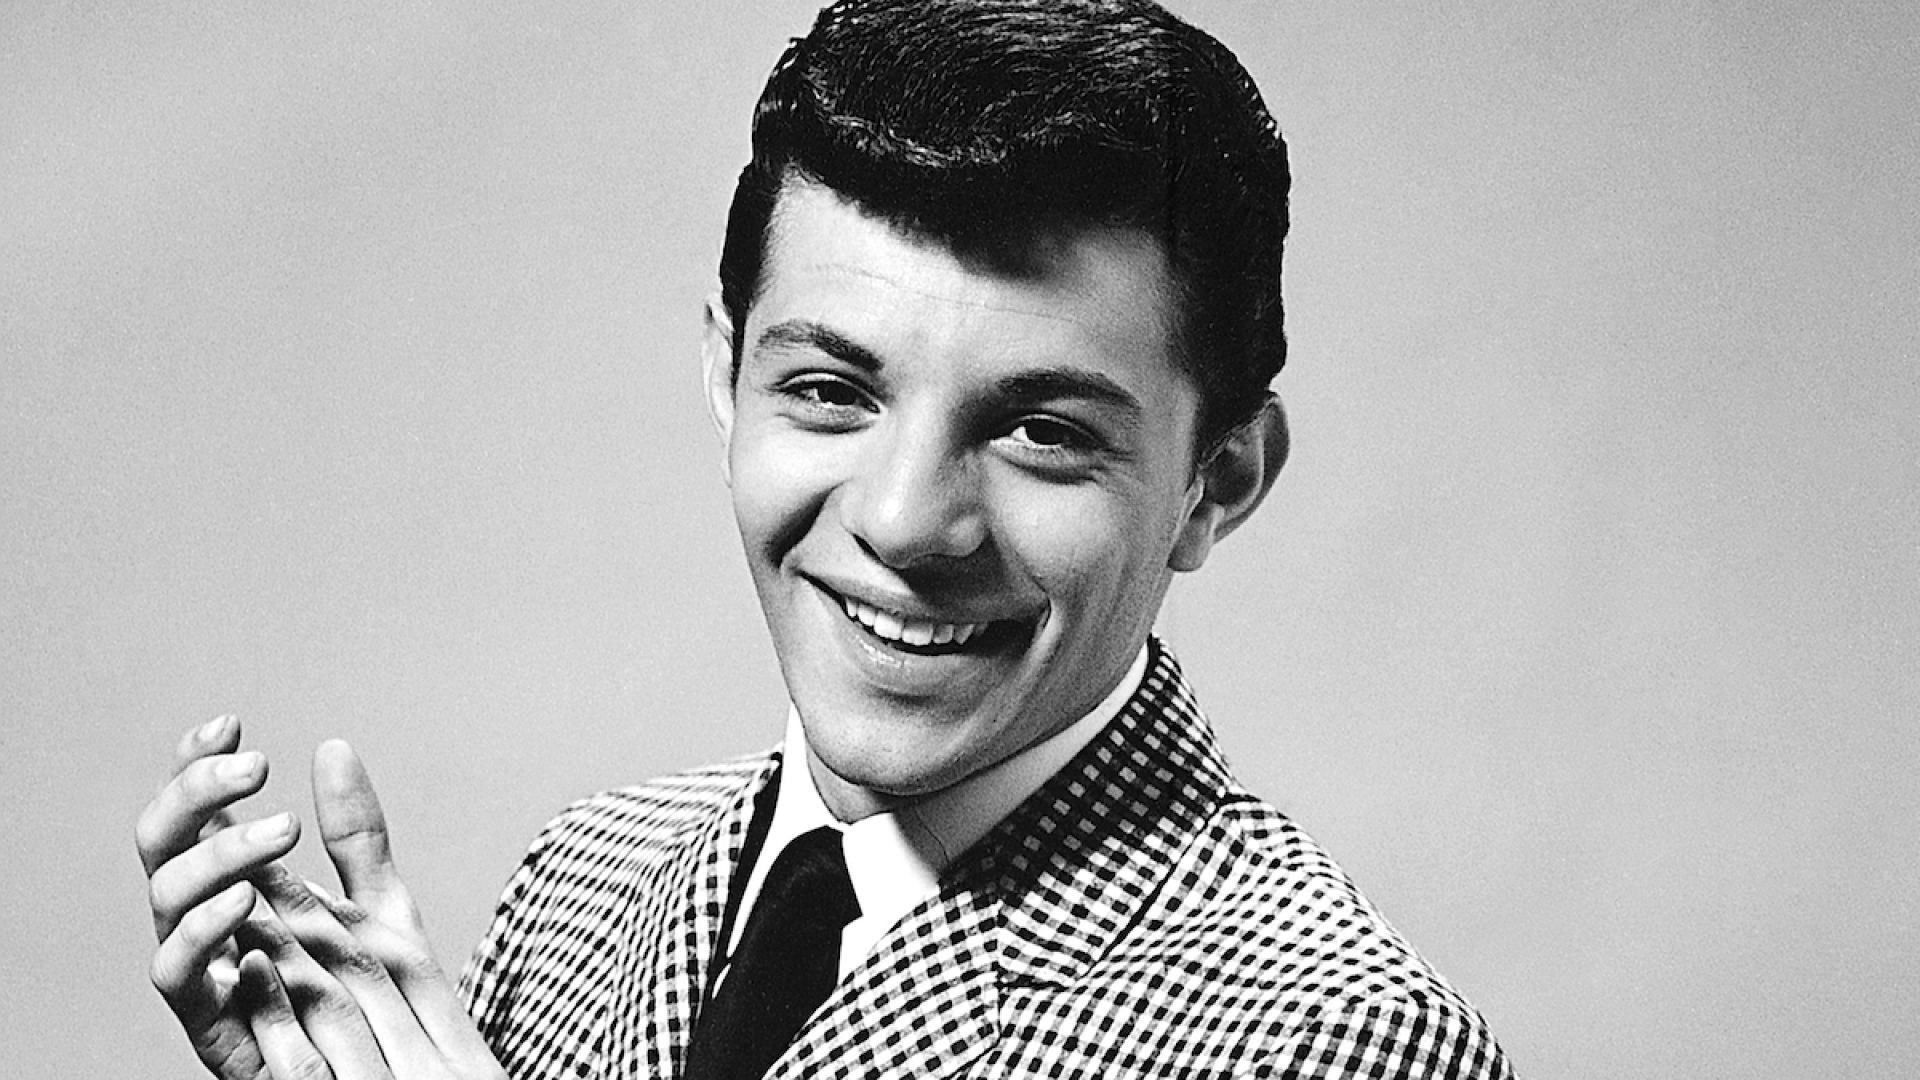 See Former Teen Idol Frankie Avalon Now at 81 — Best Life